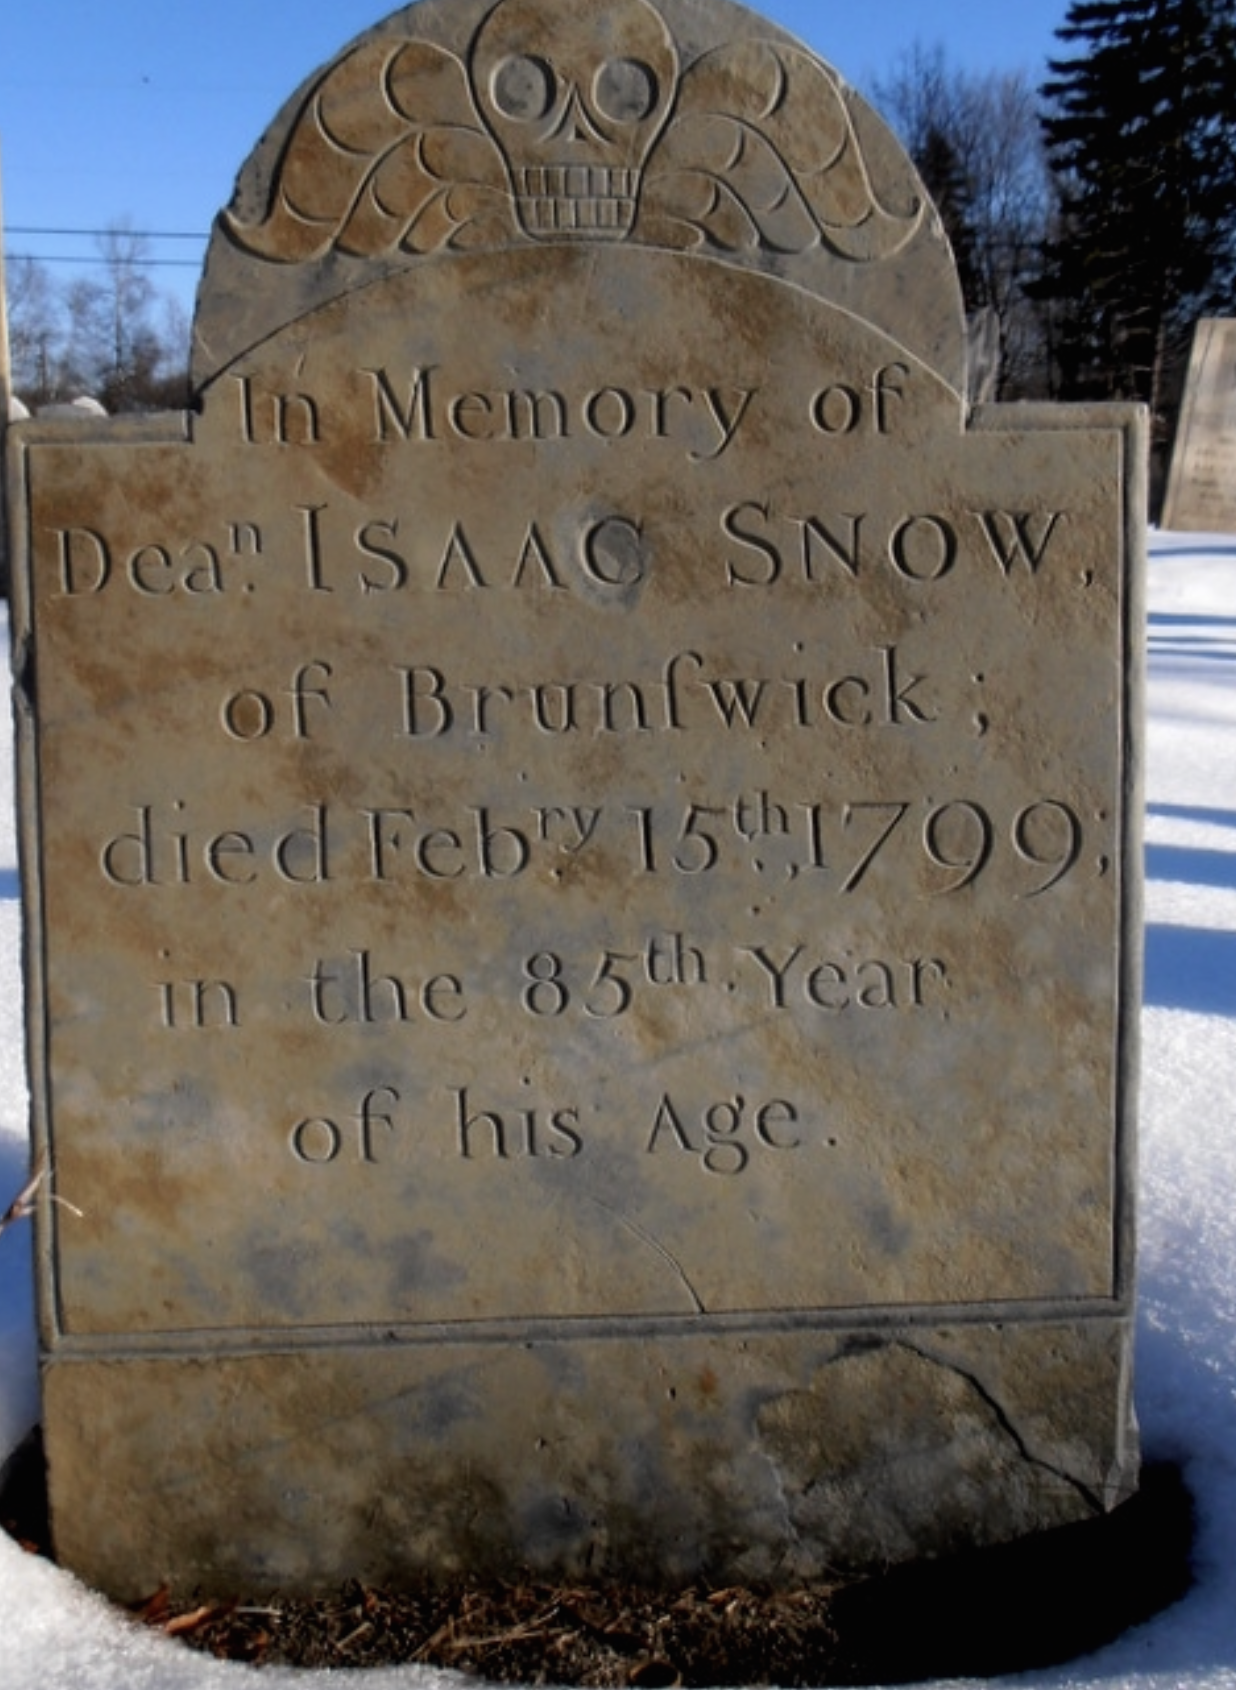 The headstone of Kim Harty's Revolutionary War patriot ancestor, Isaac Snow, who is her seventh great-grandfather. Photo courtesy of Kim Harty